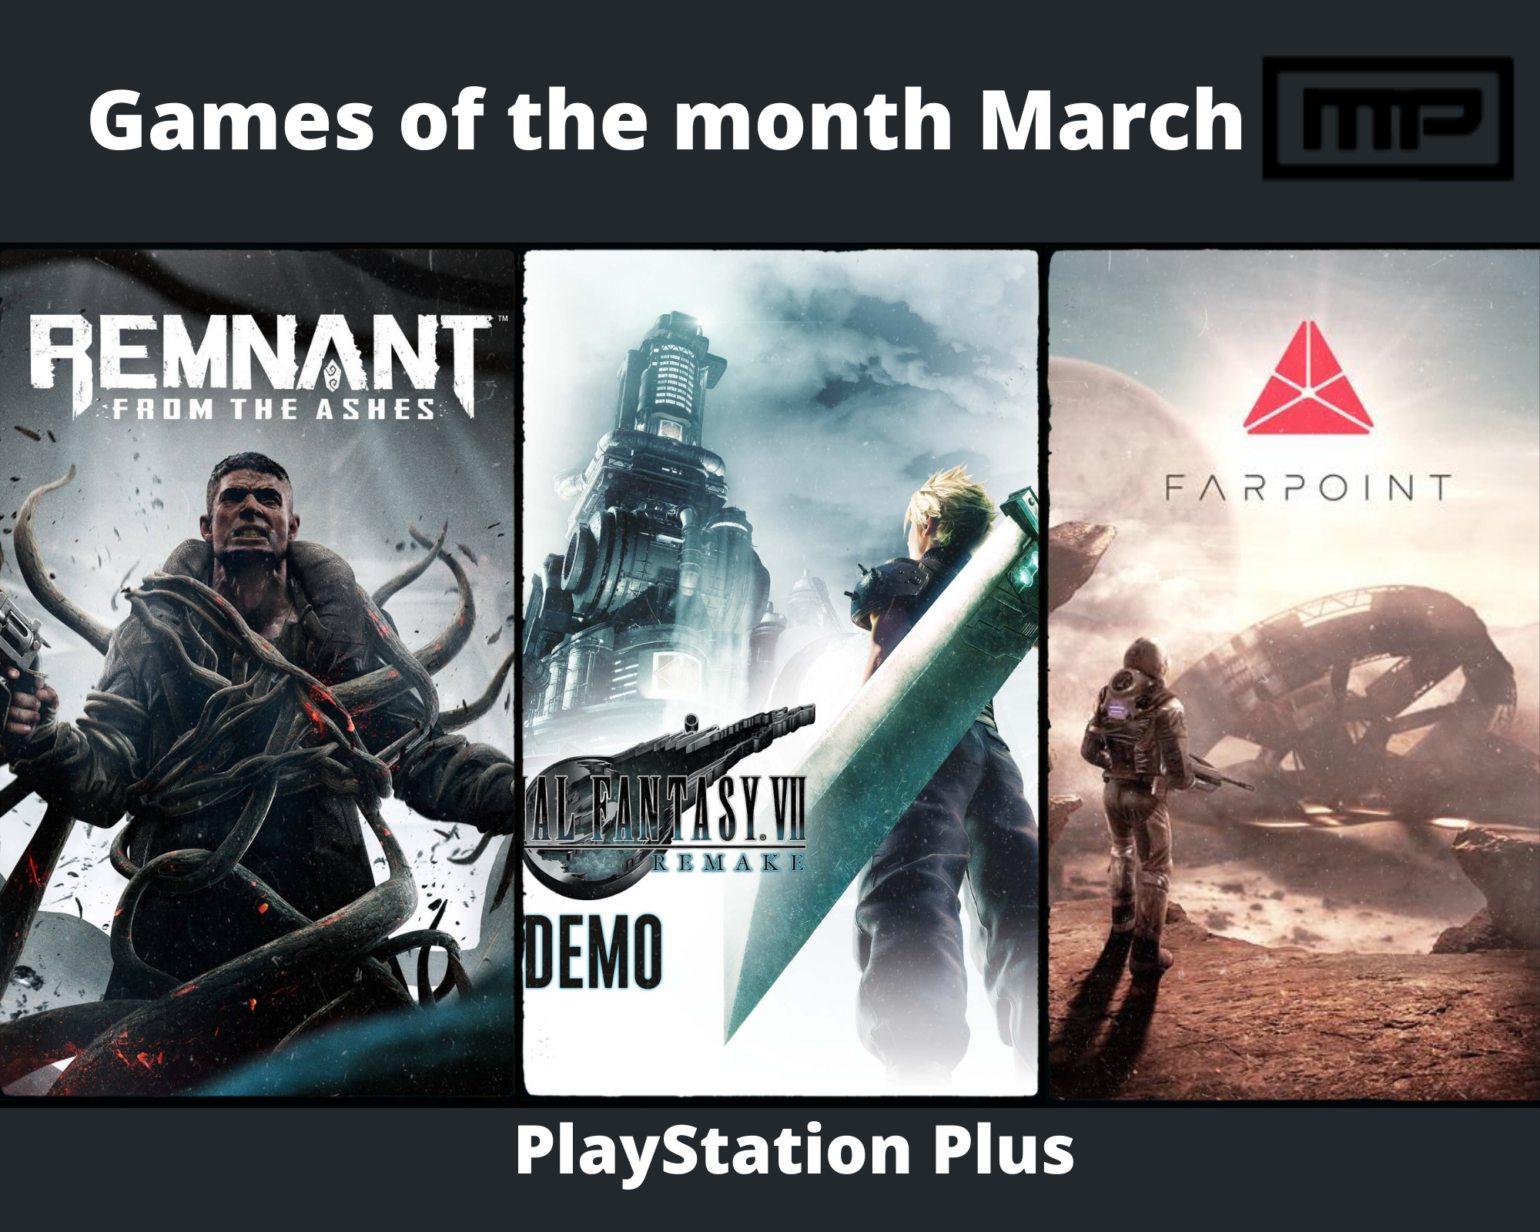 PlayStation Plus Games of the month March MMO Player